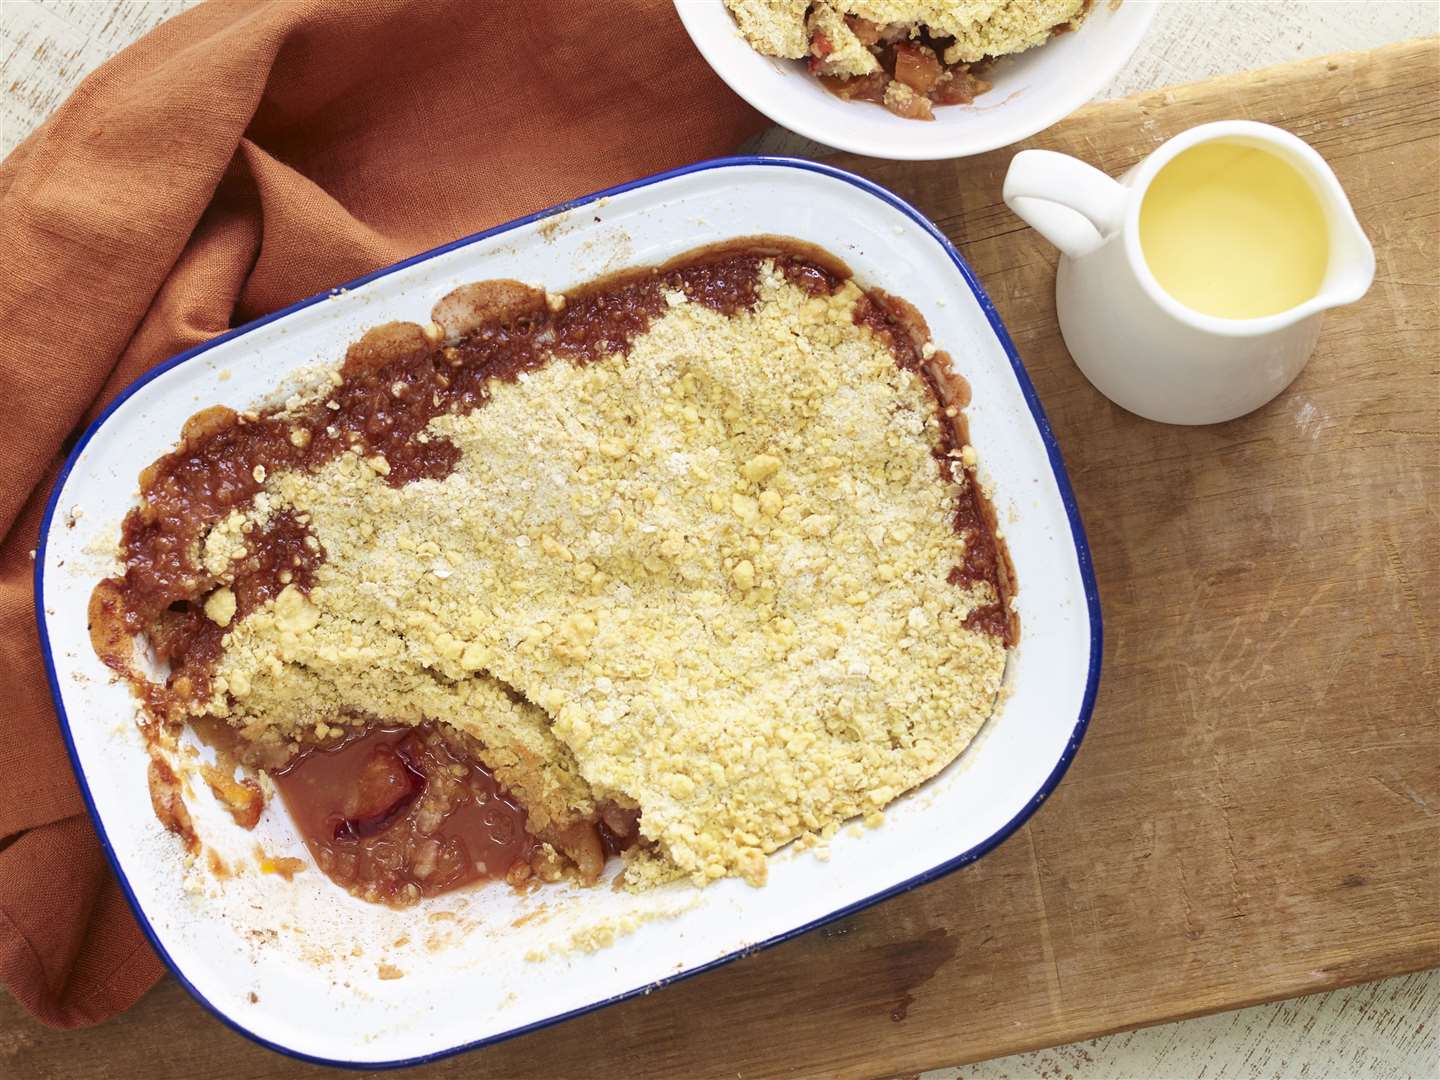 Apple and Rhubarb Crumble has also proved popular Picture: National Trust Images/William Shaw